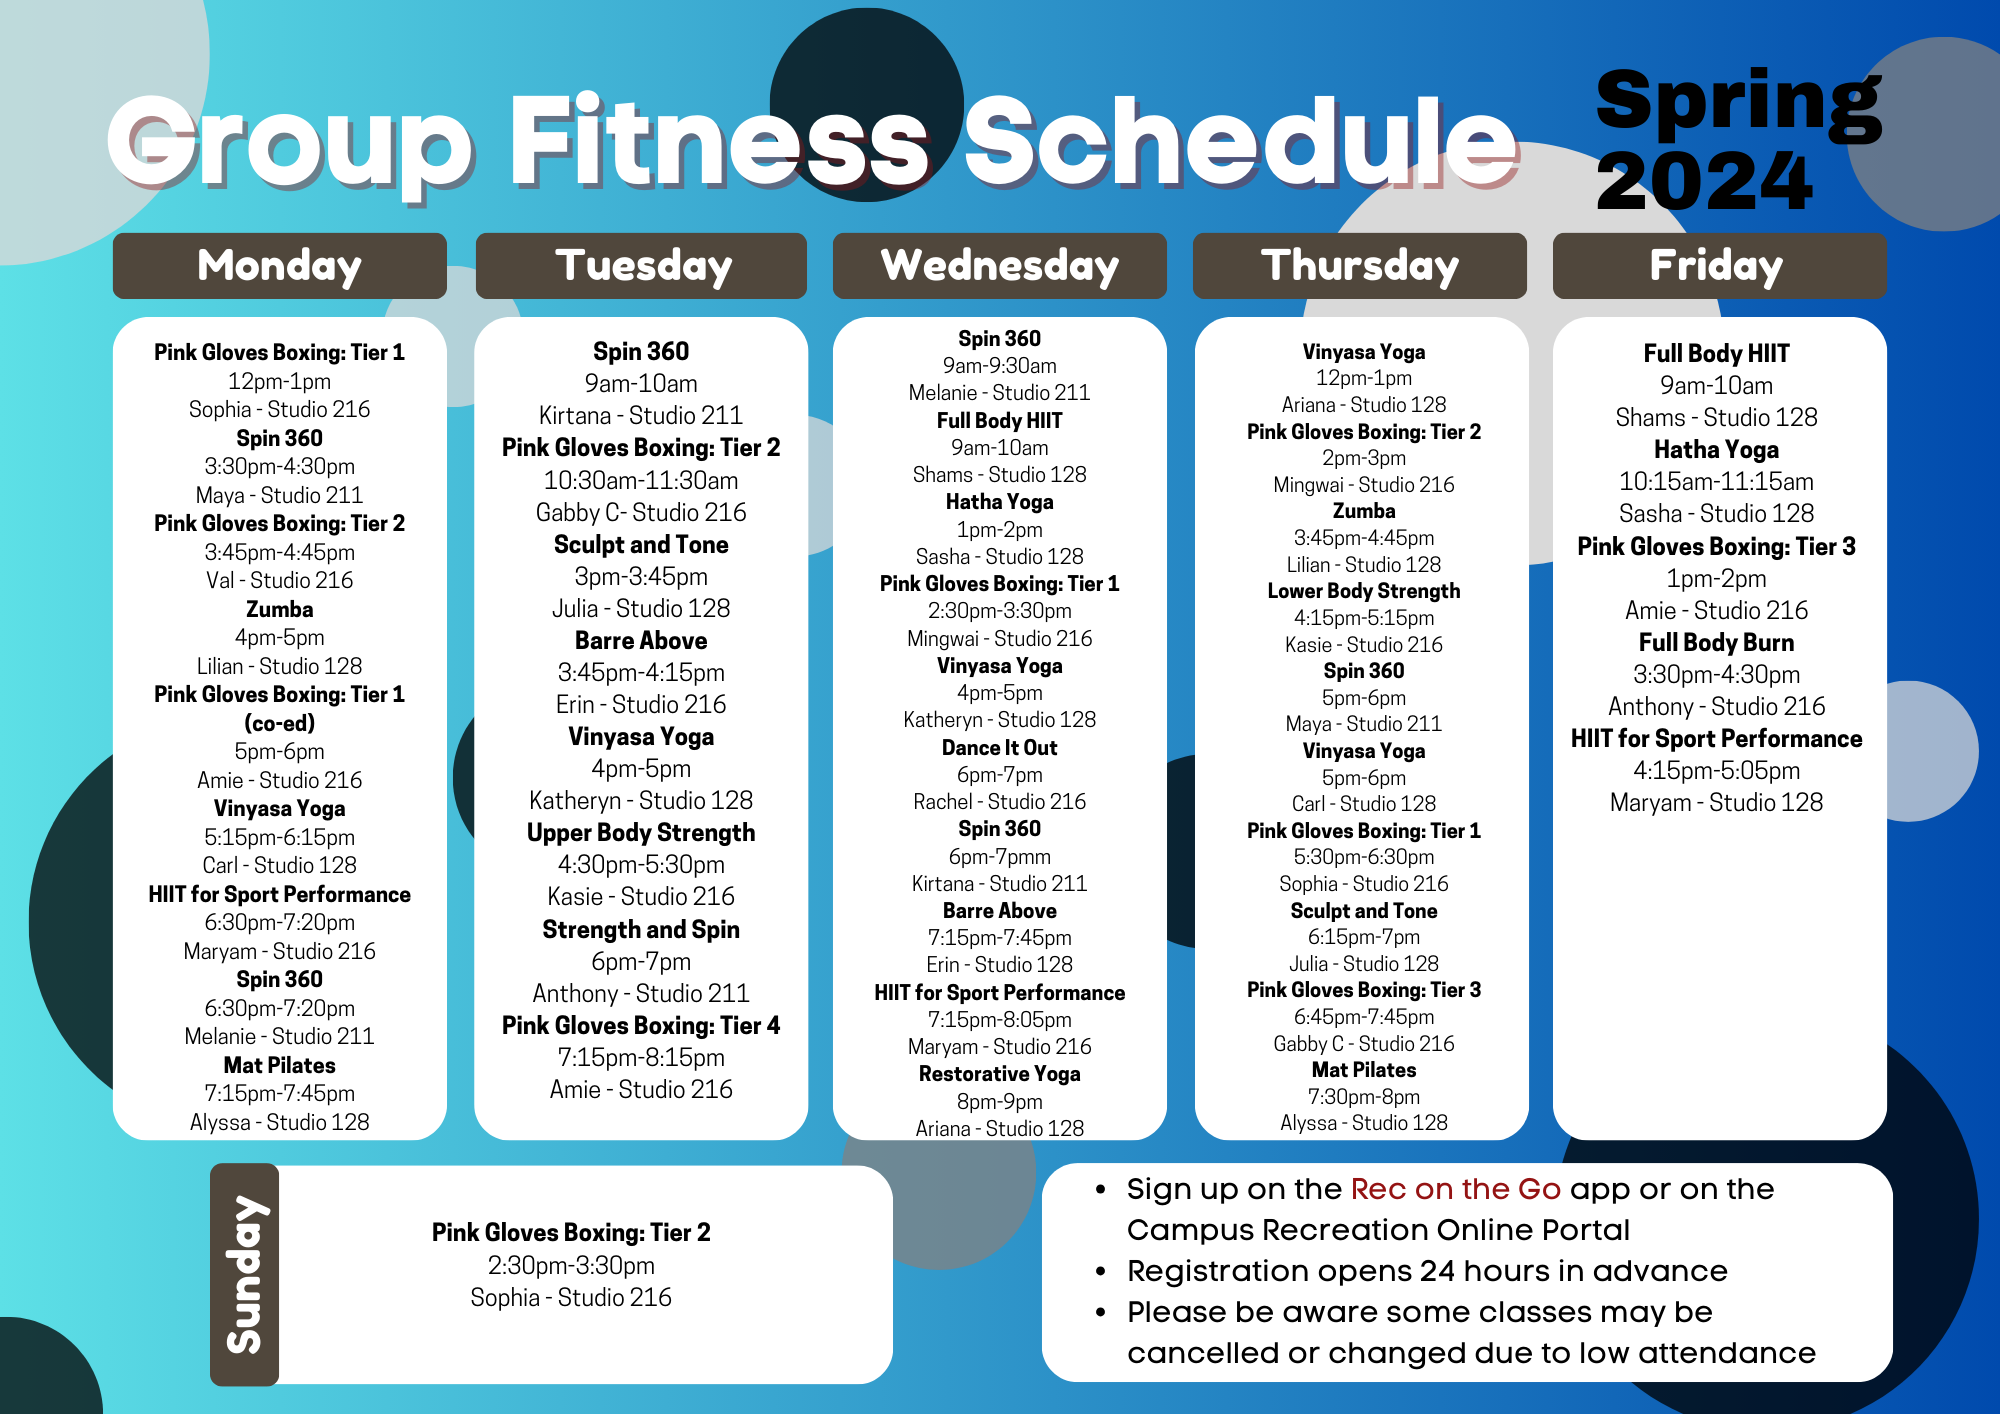 Spring 24 group fitness schedule